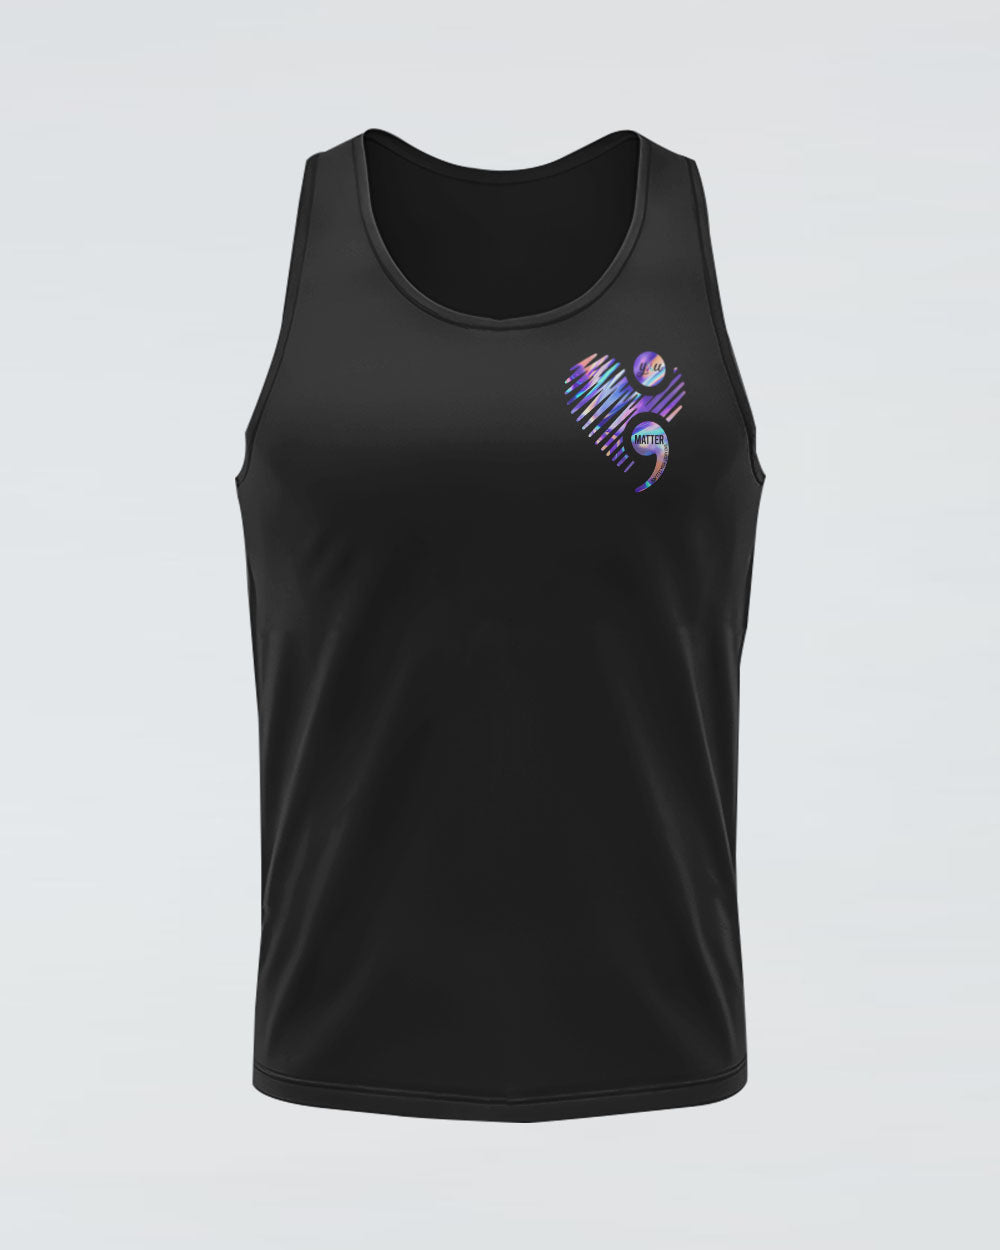 Holo Fight Suicide American Flag Women's Suicide Prevention Awareness Tanks